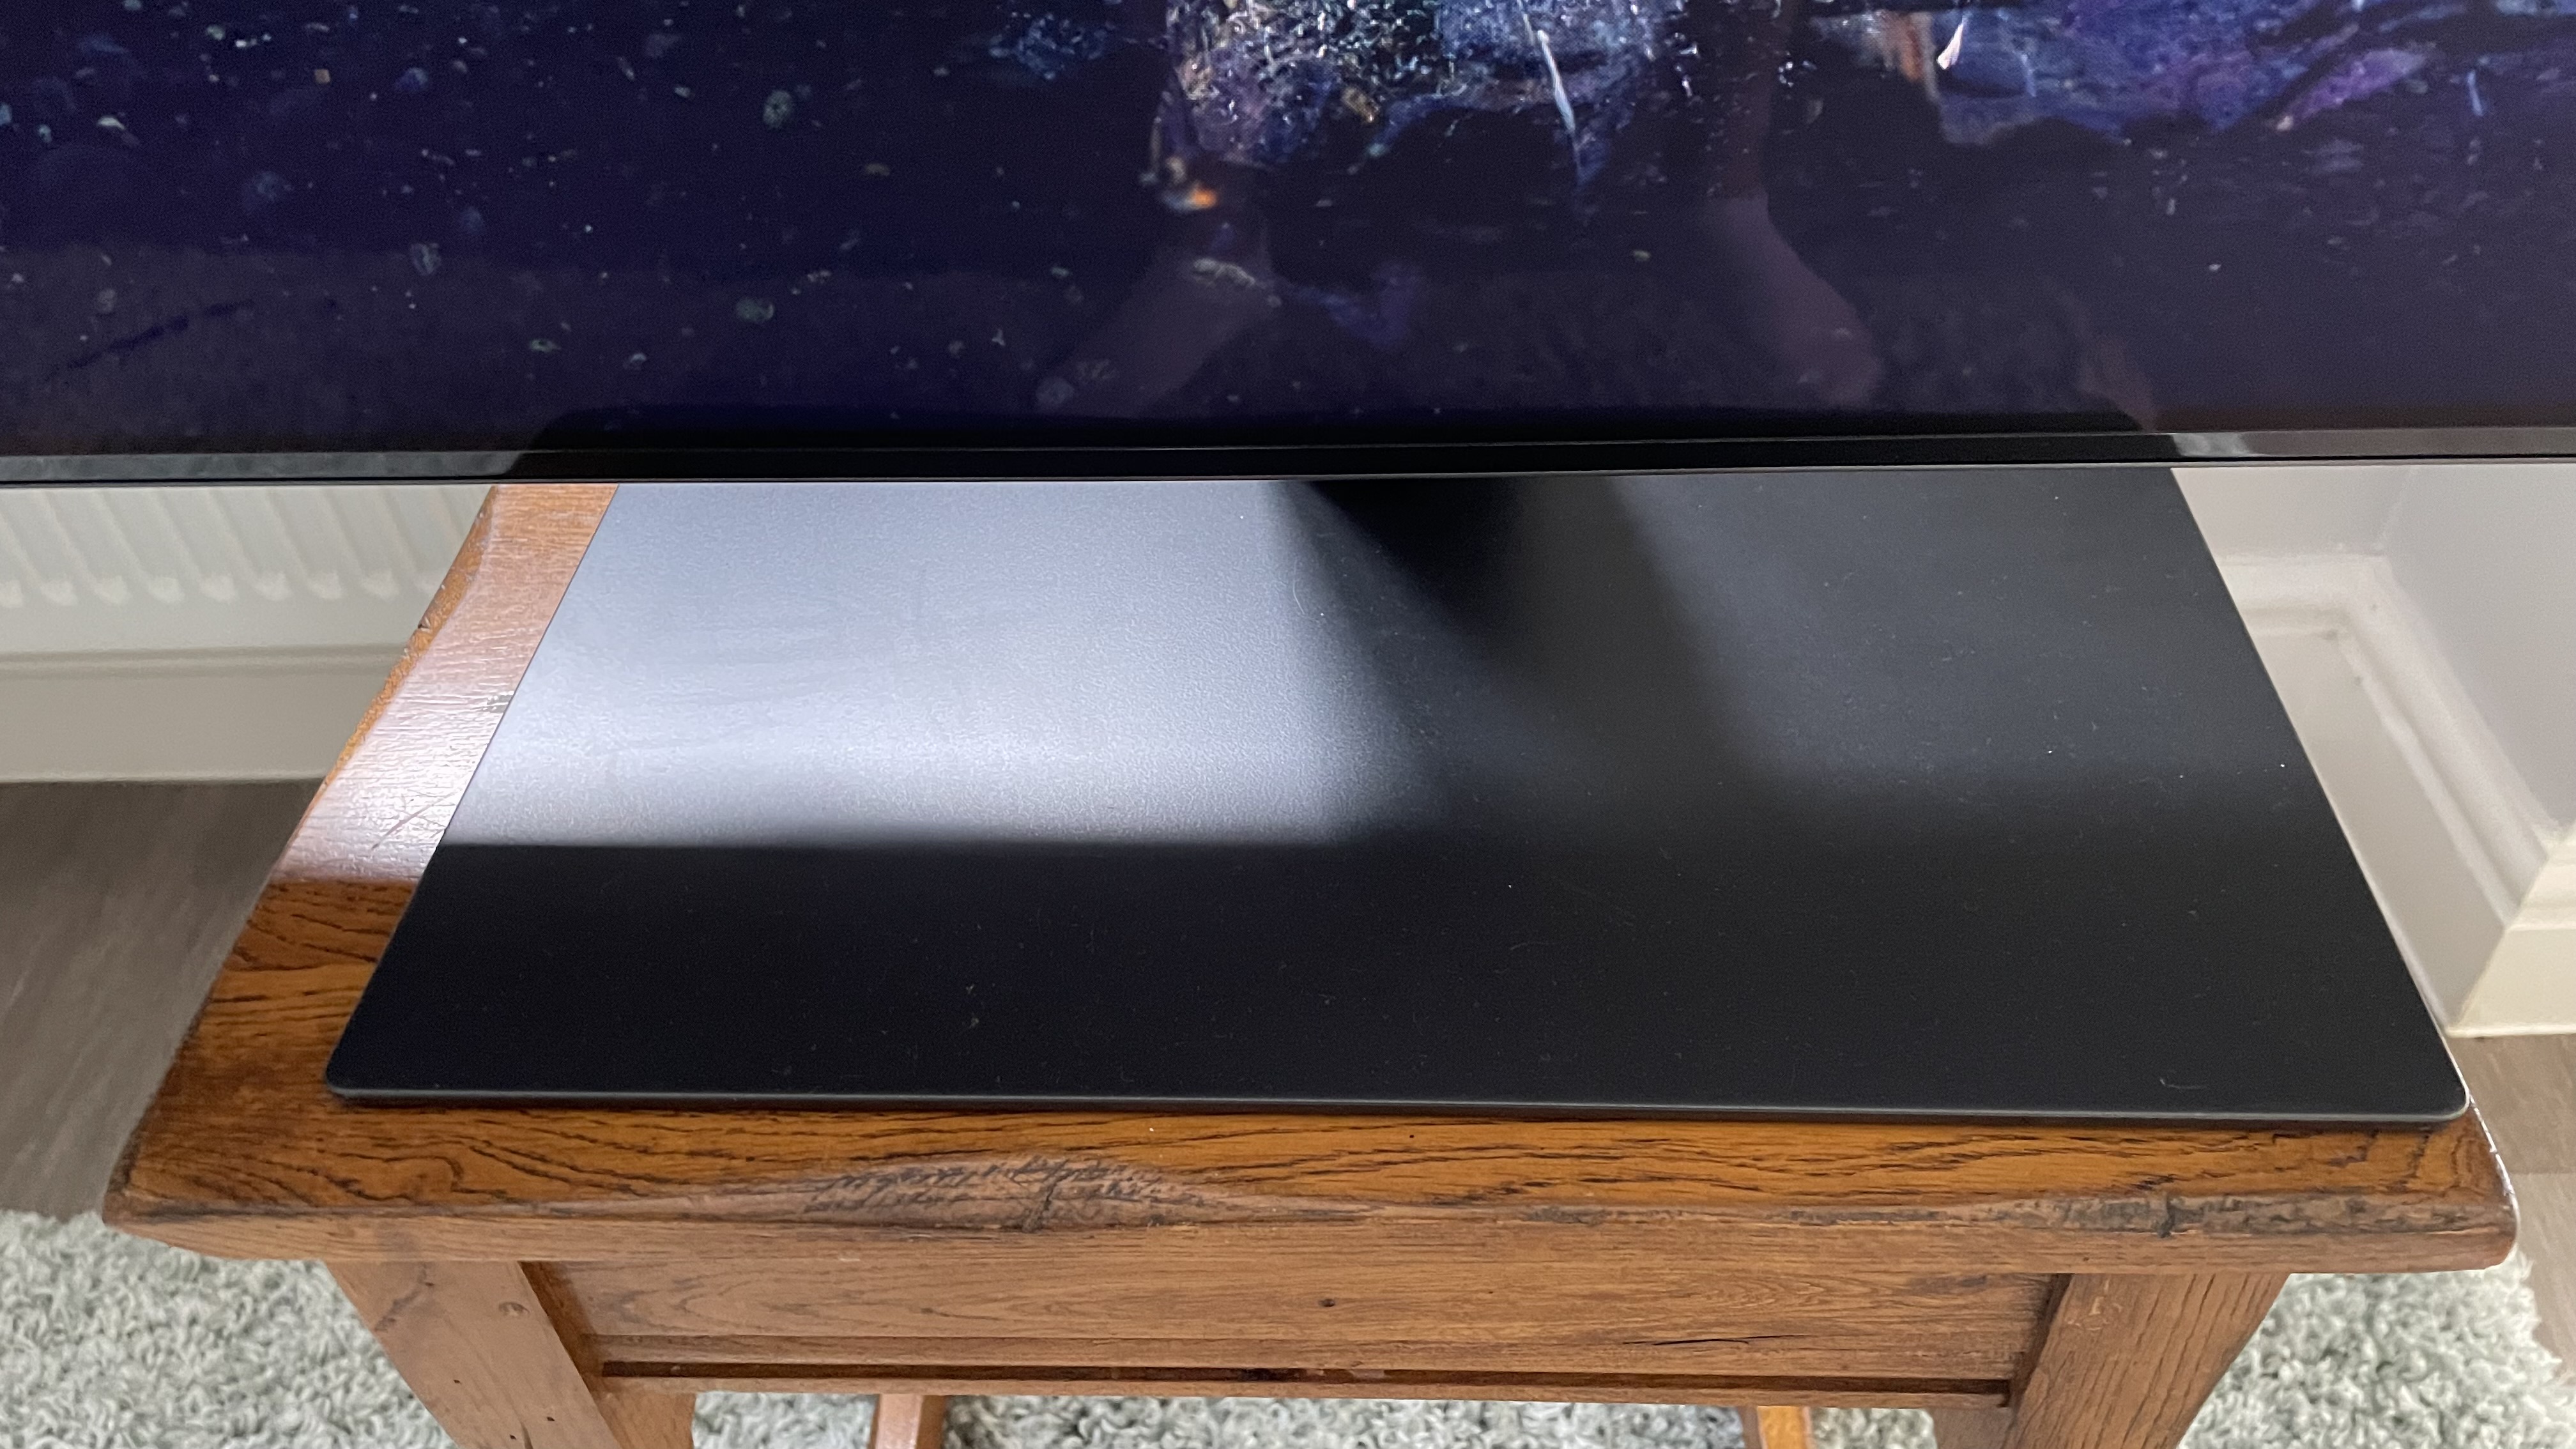 Samsung S95C OLED TV stand on wood table